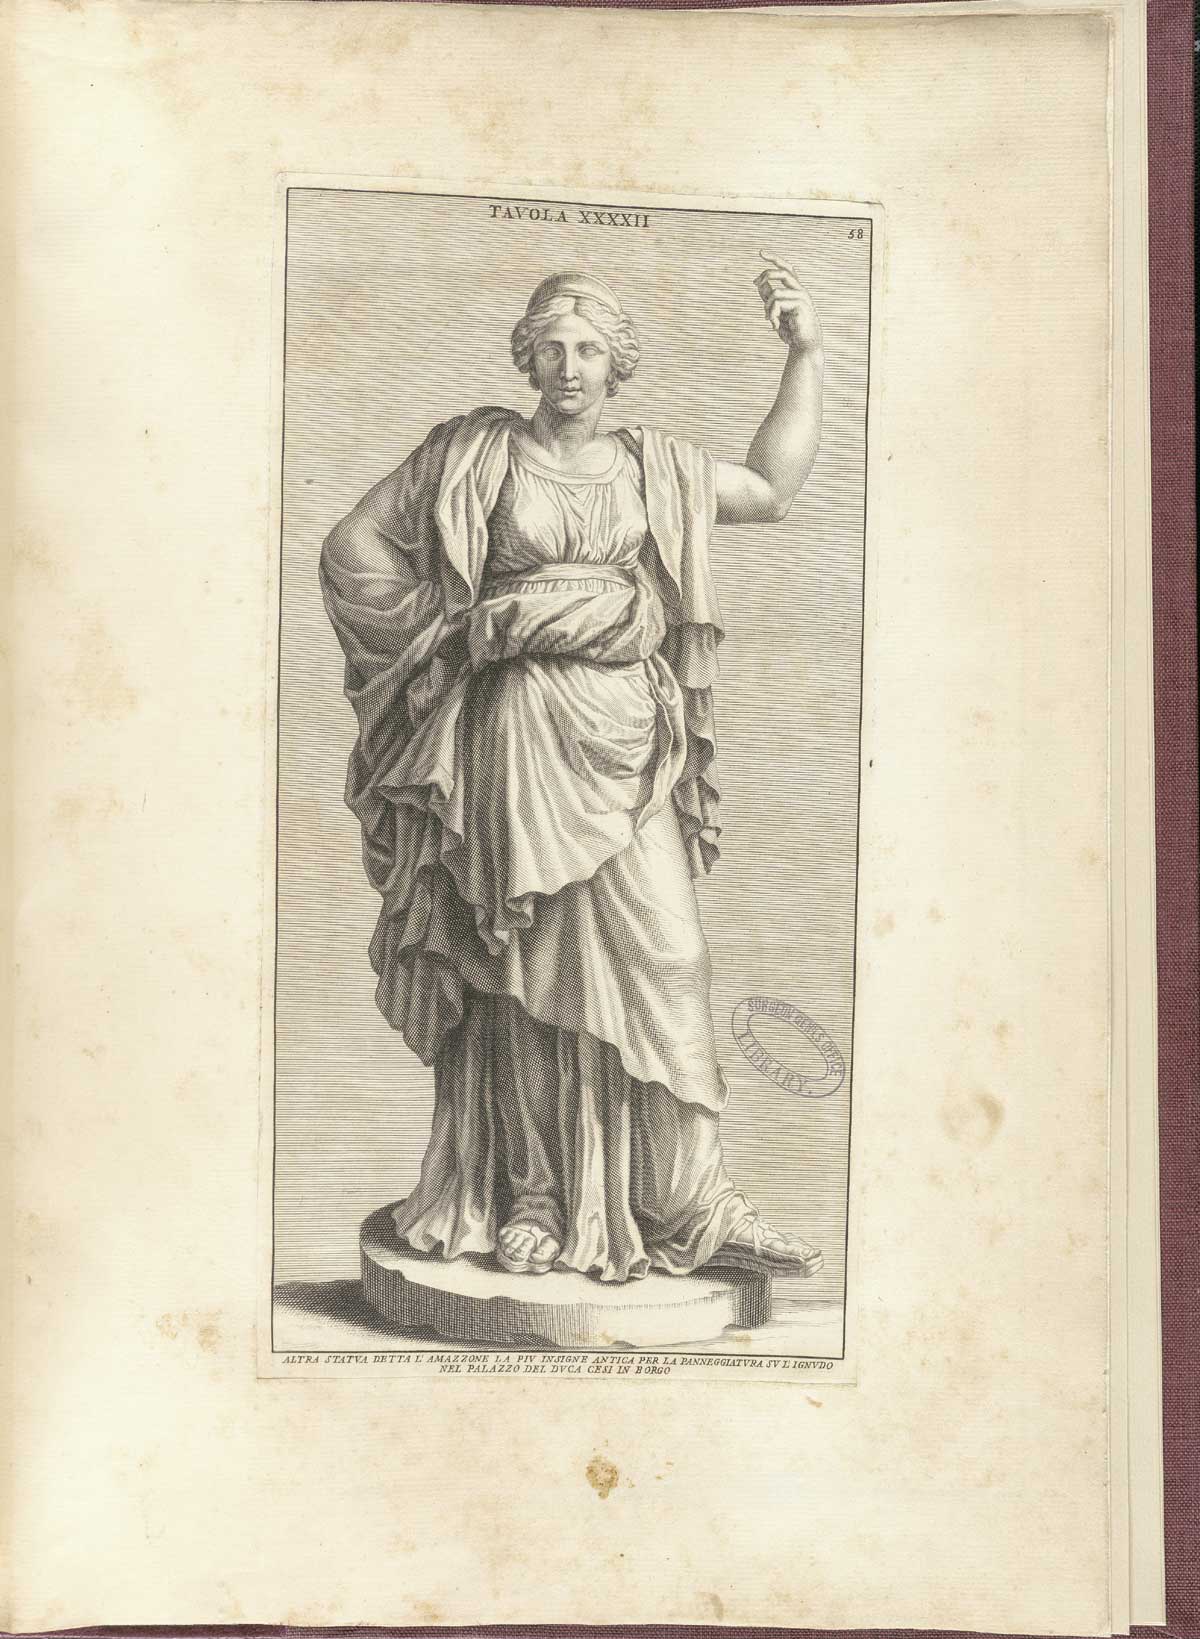 Engraving of a standing, facing statue of an Amazon wearing copious robes and with large sandaled feet, from Bernardino Genga’s Anatomia per uso et intelligenza del disegno, NLM Call no.: WZ 250 G329an 1691.